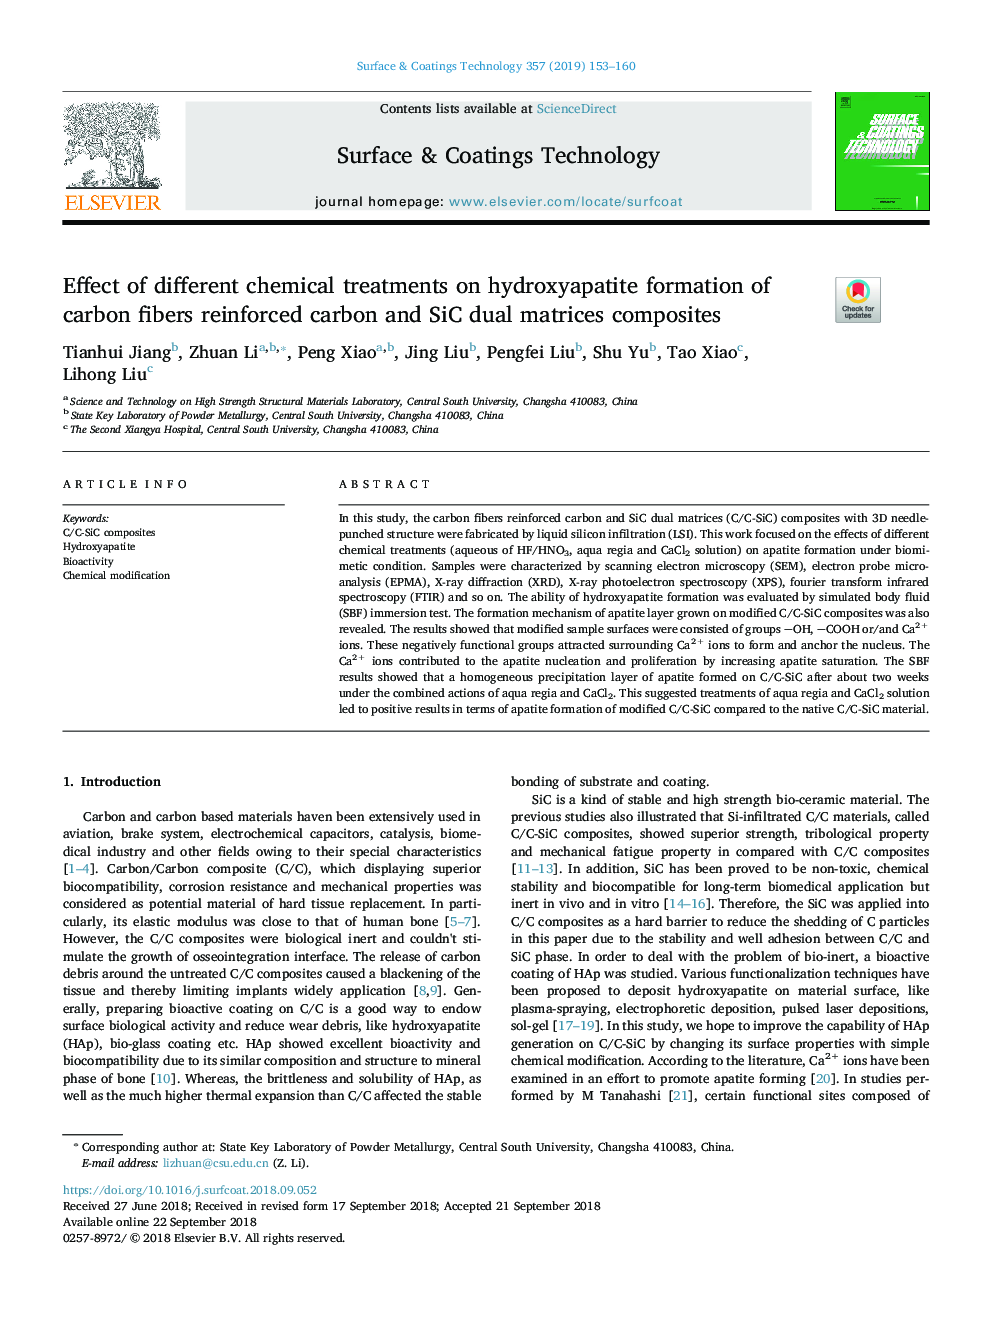 Effect of different chemical treatments on hydroxyapatite formation of carbon fibers reinforced carbon and SiC dual matrices composites